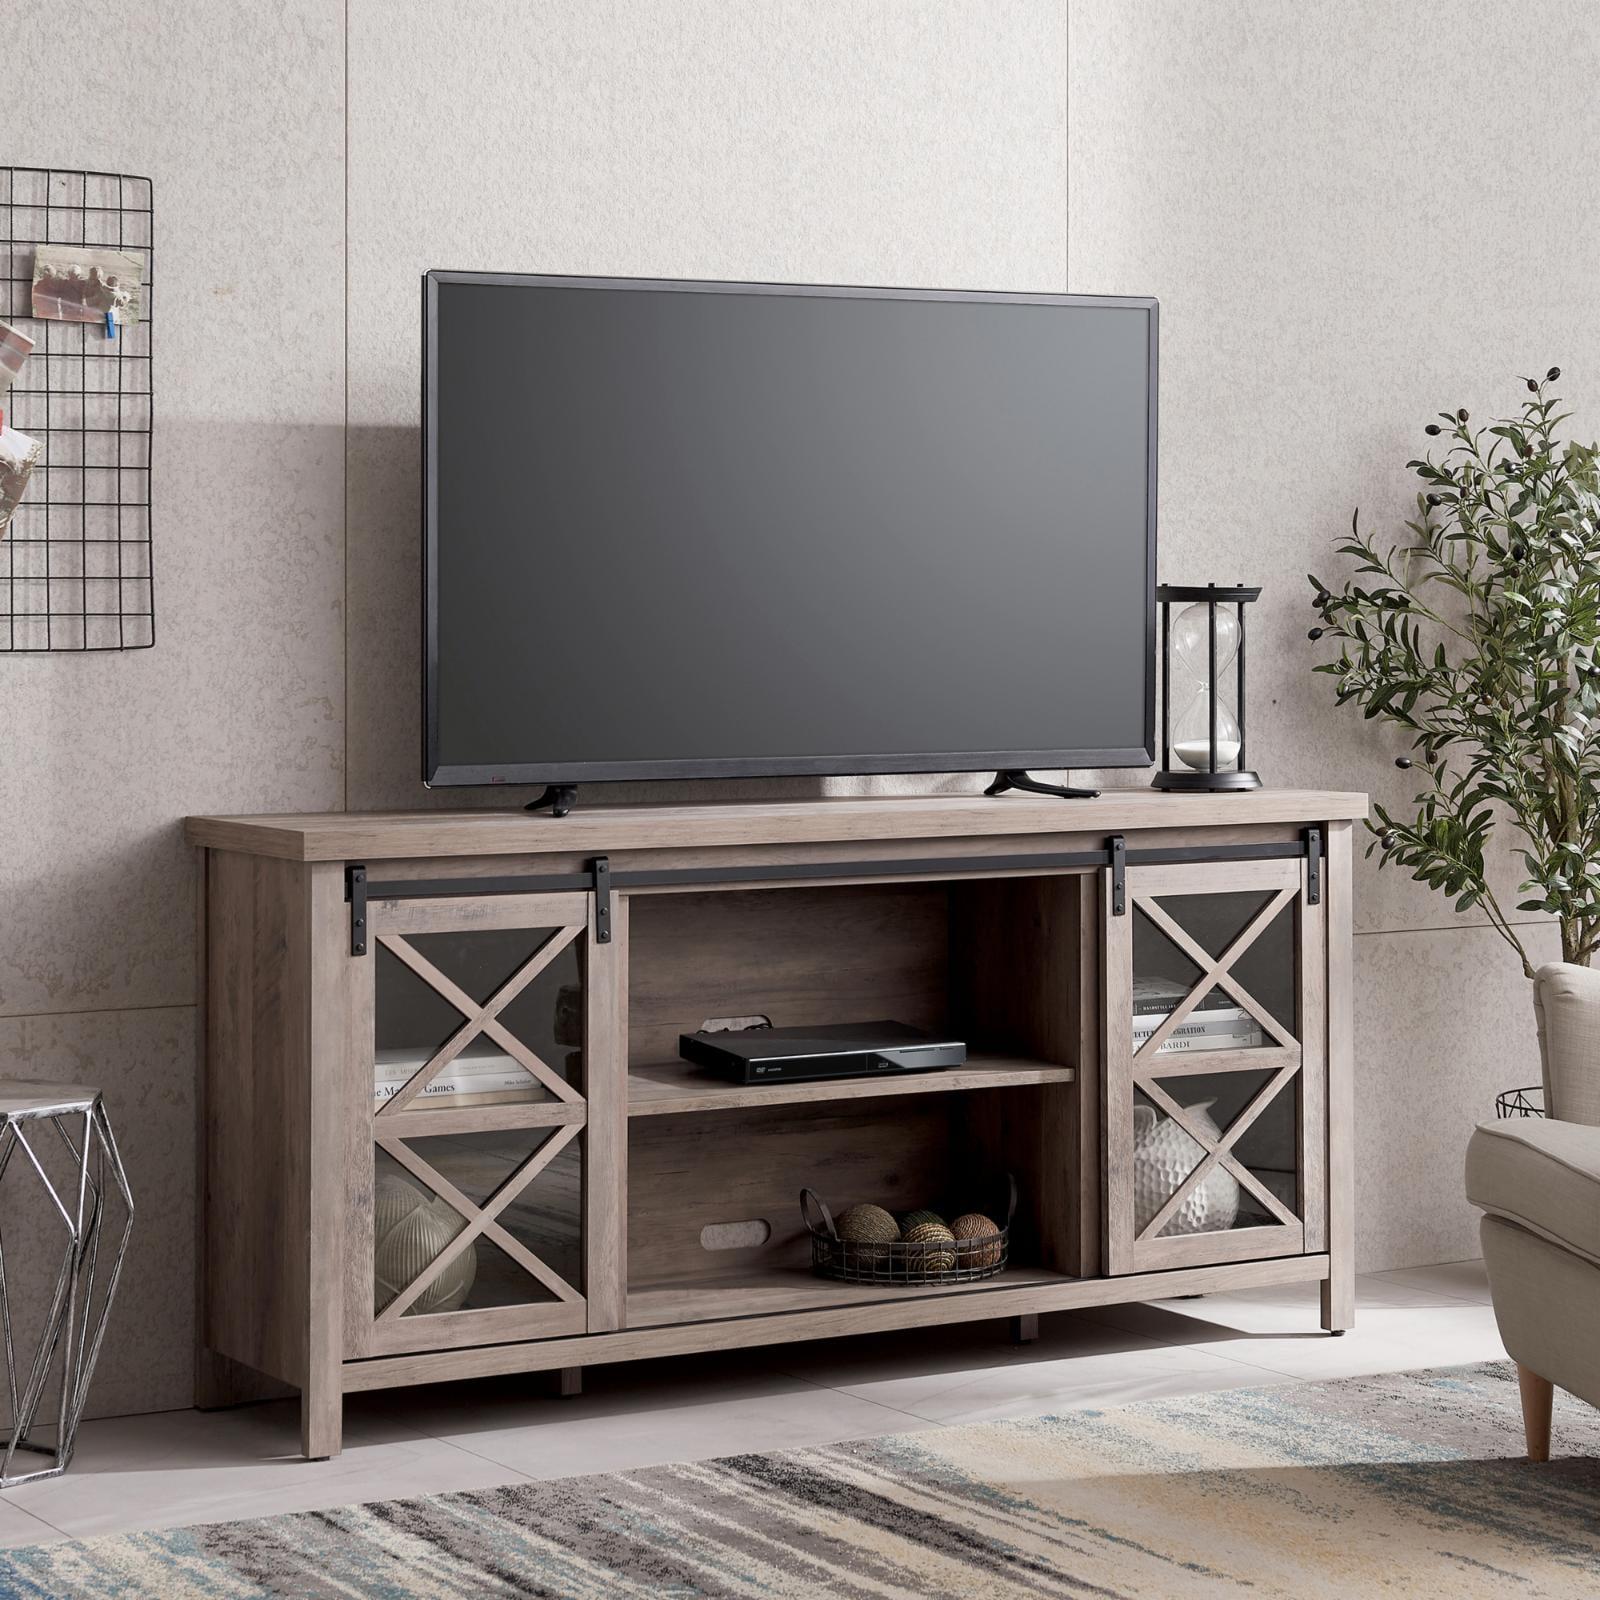 Clementine Antiqued Gray Oak TV Stand with Sliding Barn Doors